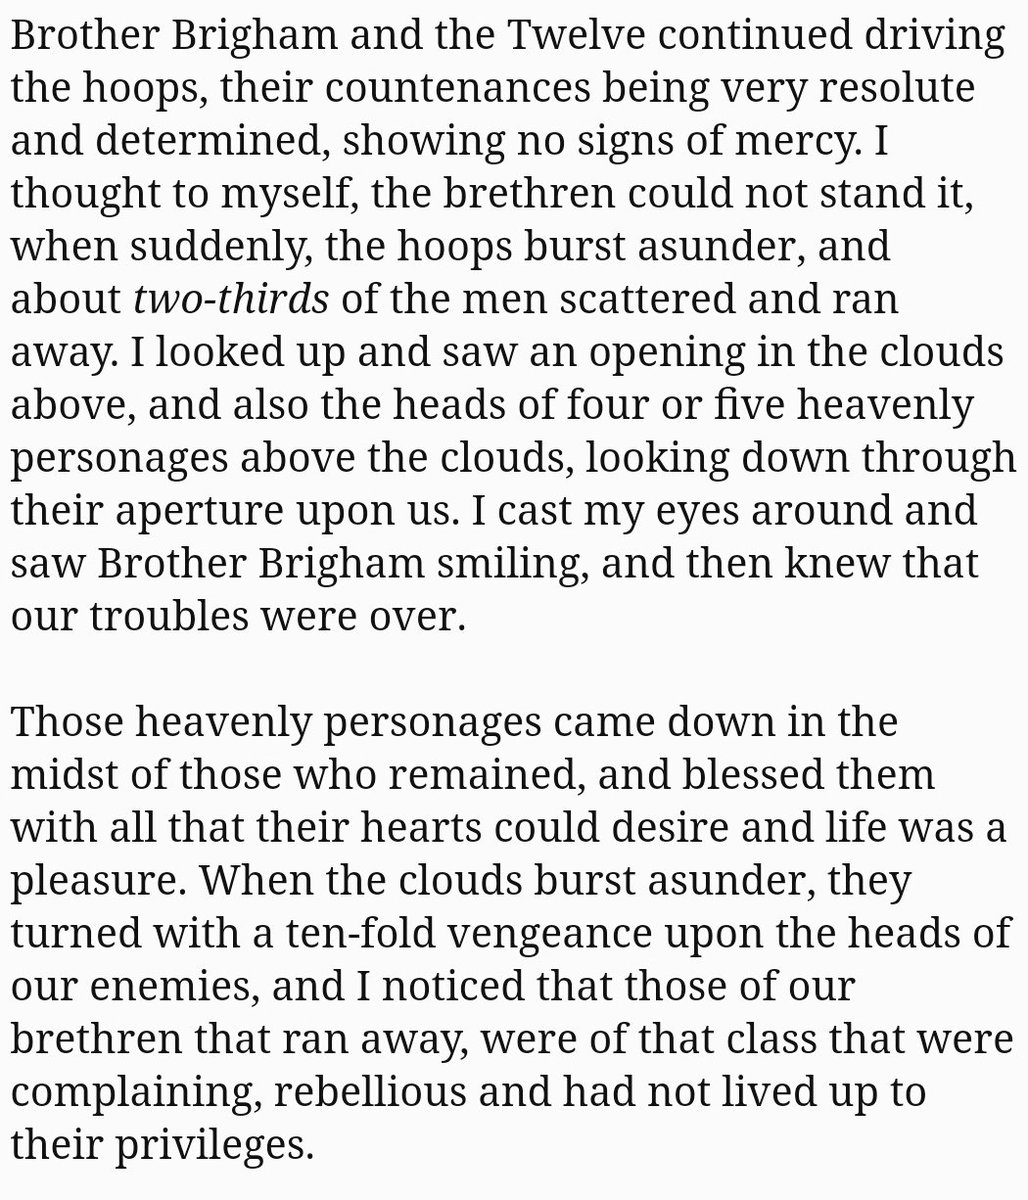 2"When the clouds burst asunder, they turned with a ten-fold vengeance upon the heads of our enemies, and I noticed that those of our brethren that ran away, were of that class that were complaining, rebellious and had not lived up to their privileges.">